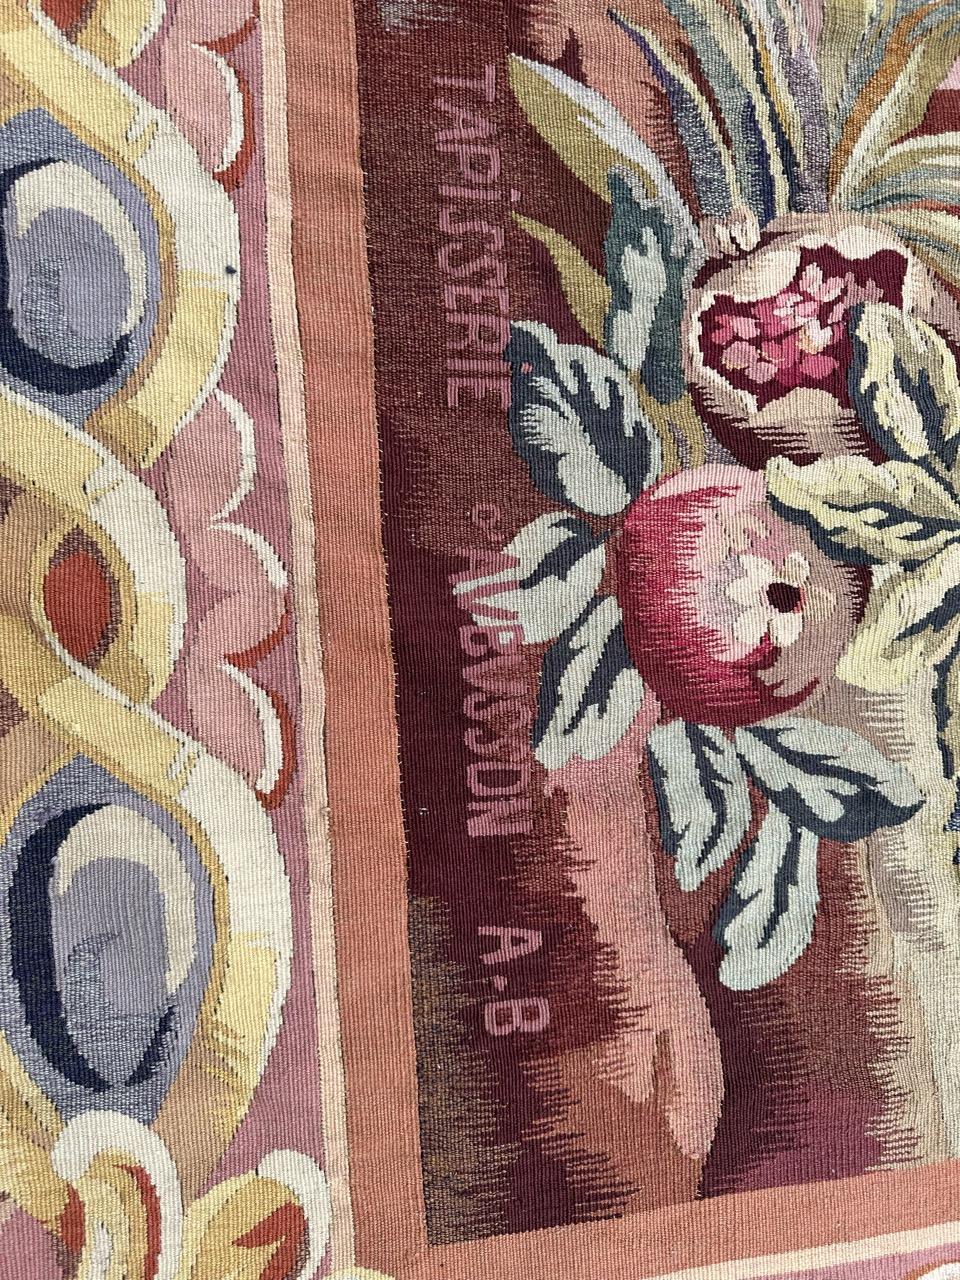 Exquisite Early 20th Century French Tapestry Fit for Royalty!

Discover a remarkable and exceedingly rare large antique French tapestry, dating back to the early 20th century. This masterpiece is believed to have been commissioned for a grand